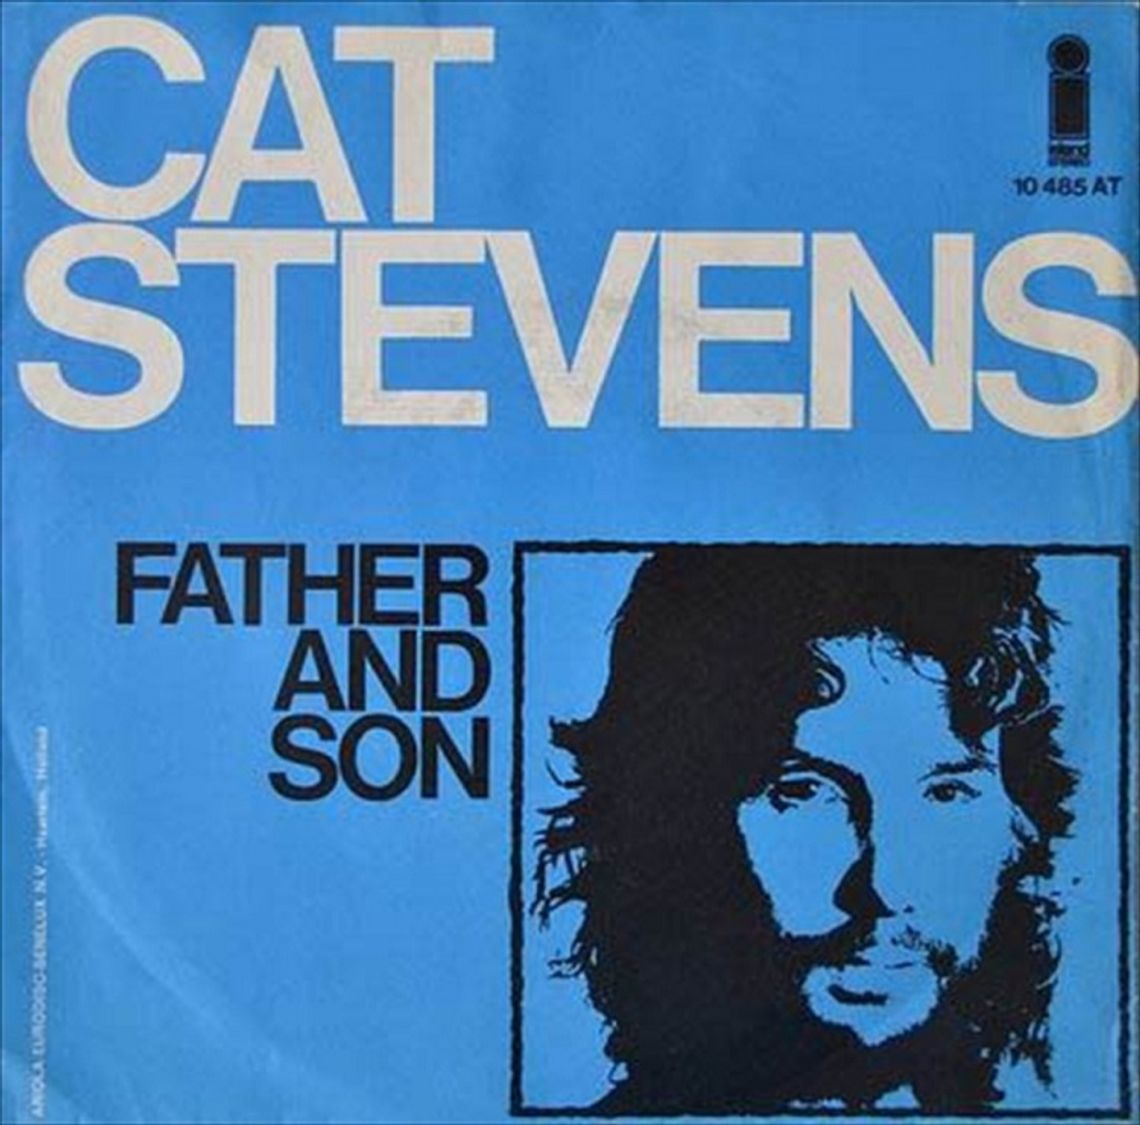 CAT STEVENS "Father and son"